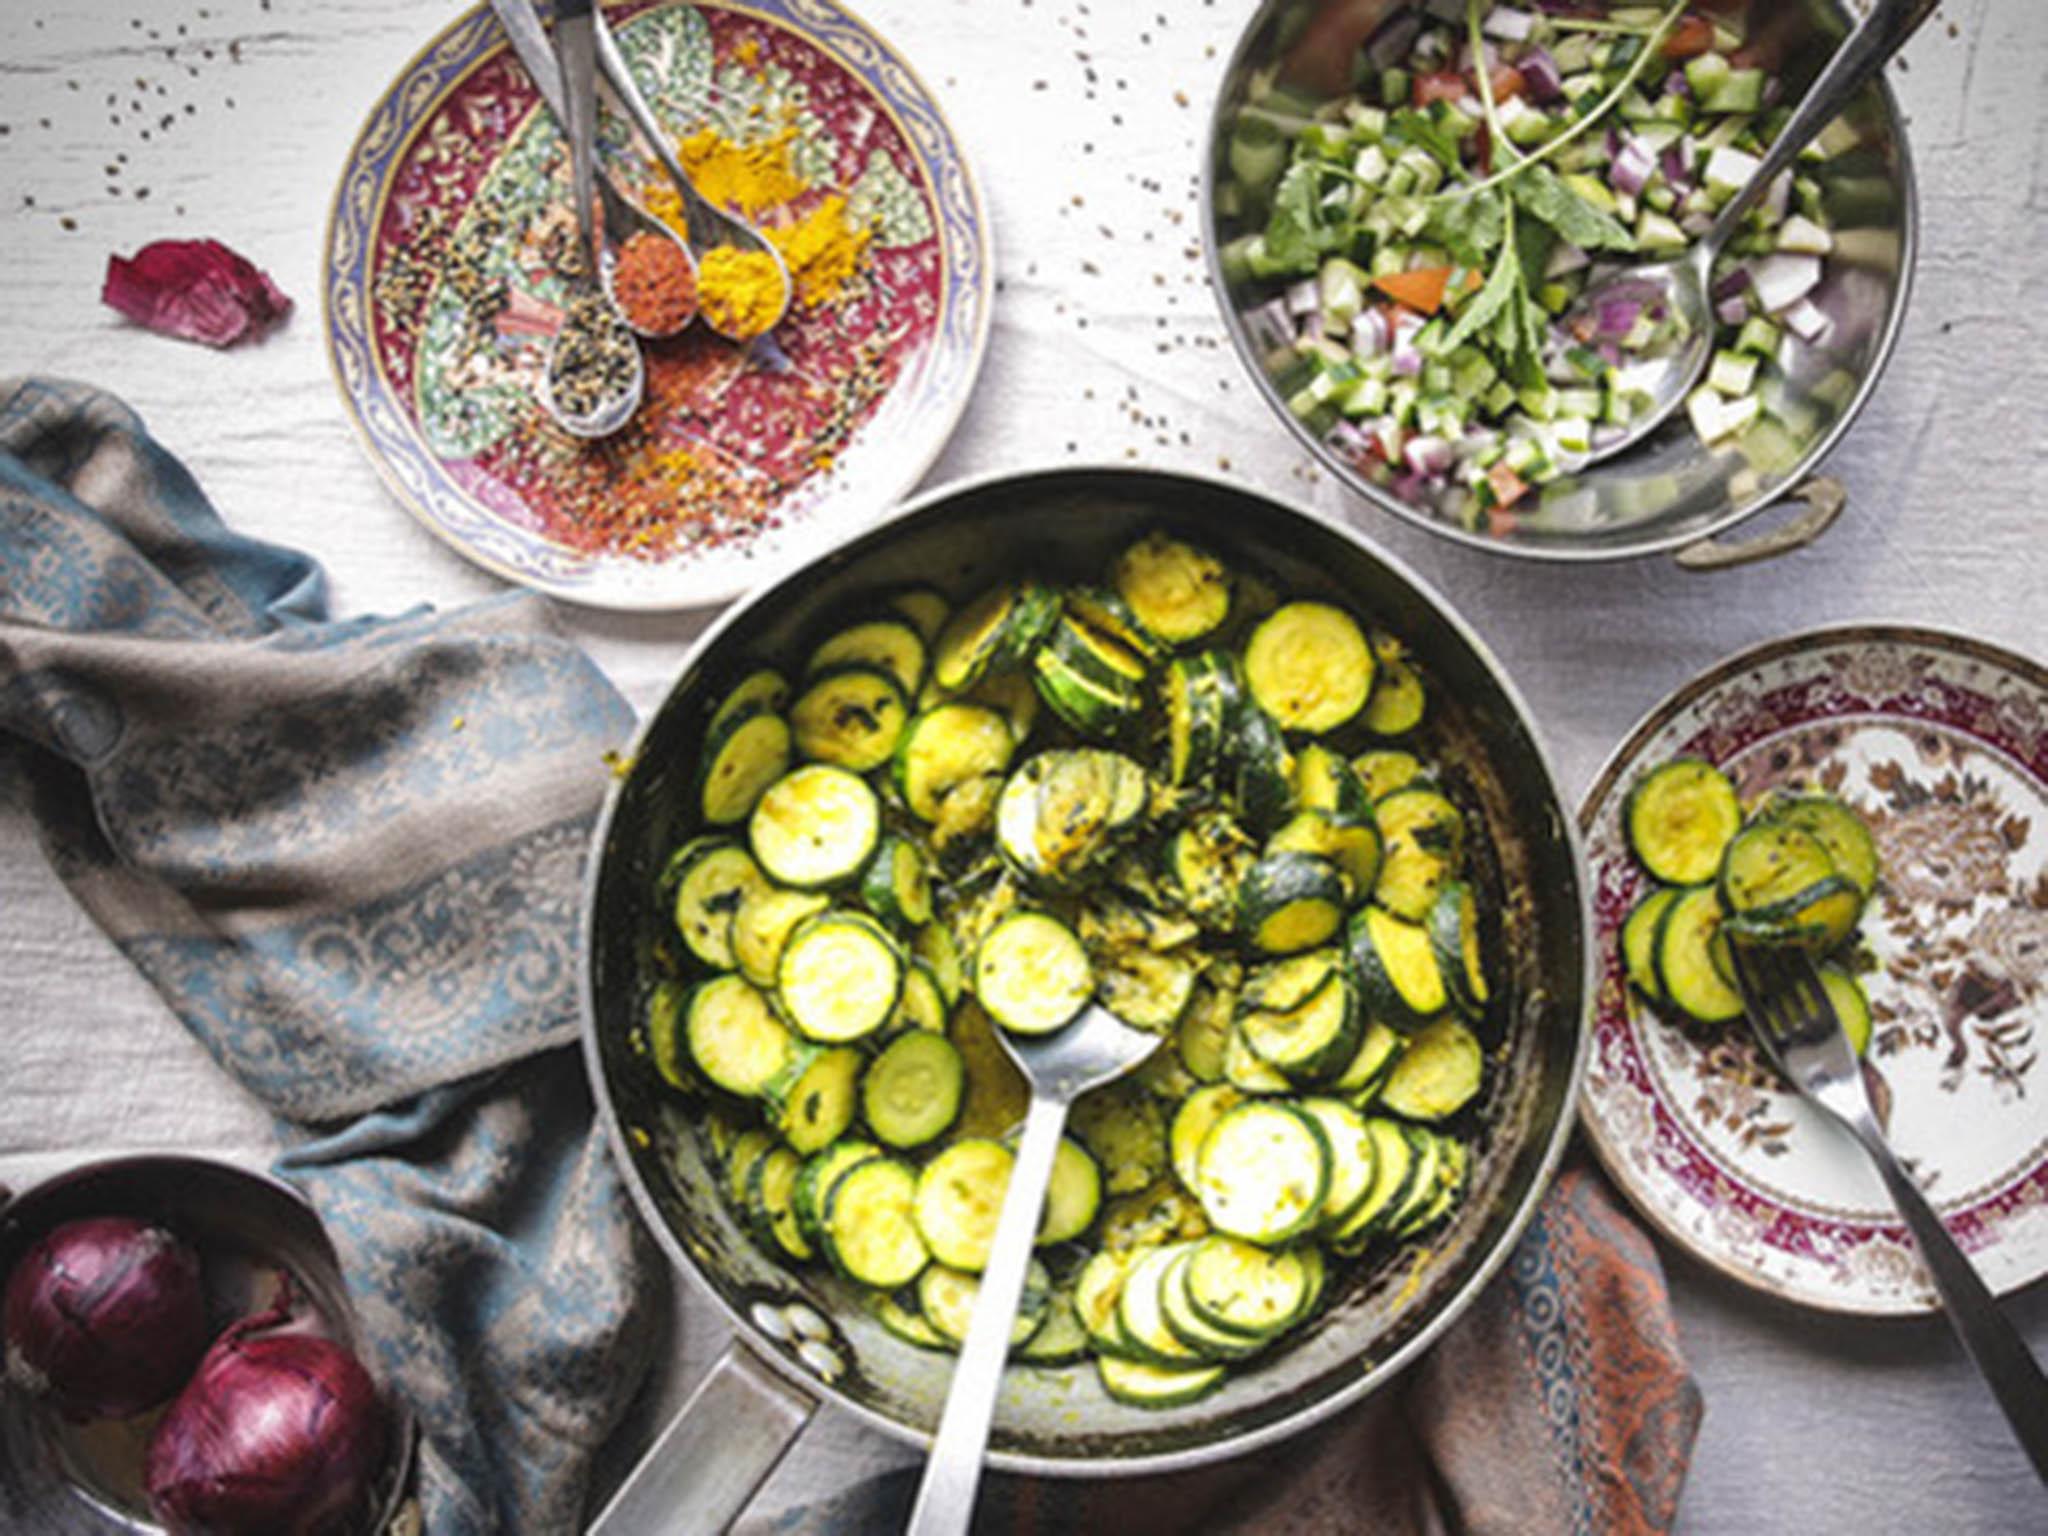 Lightly fried for a few minutes, courgettes become juicy and cameralised adding real flavour